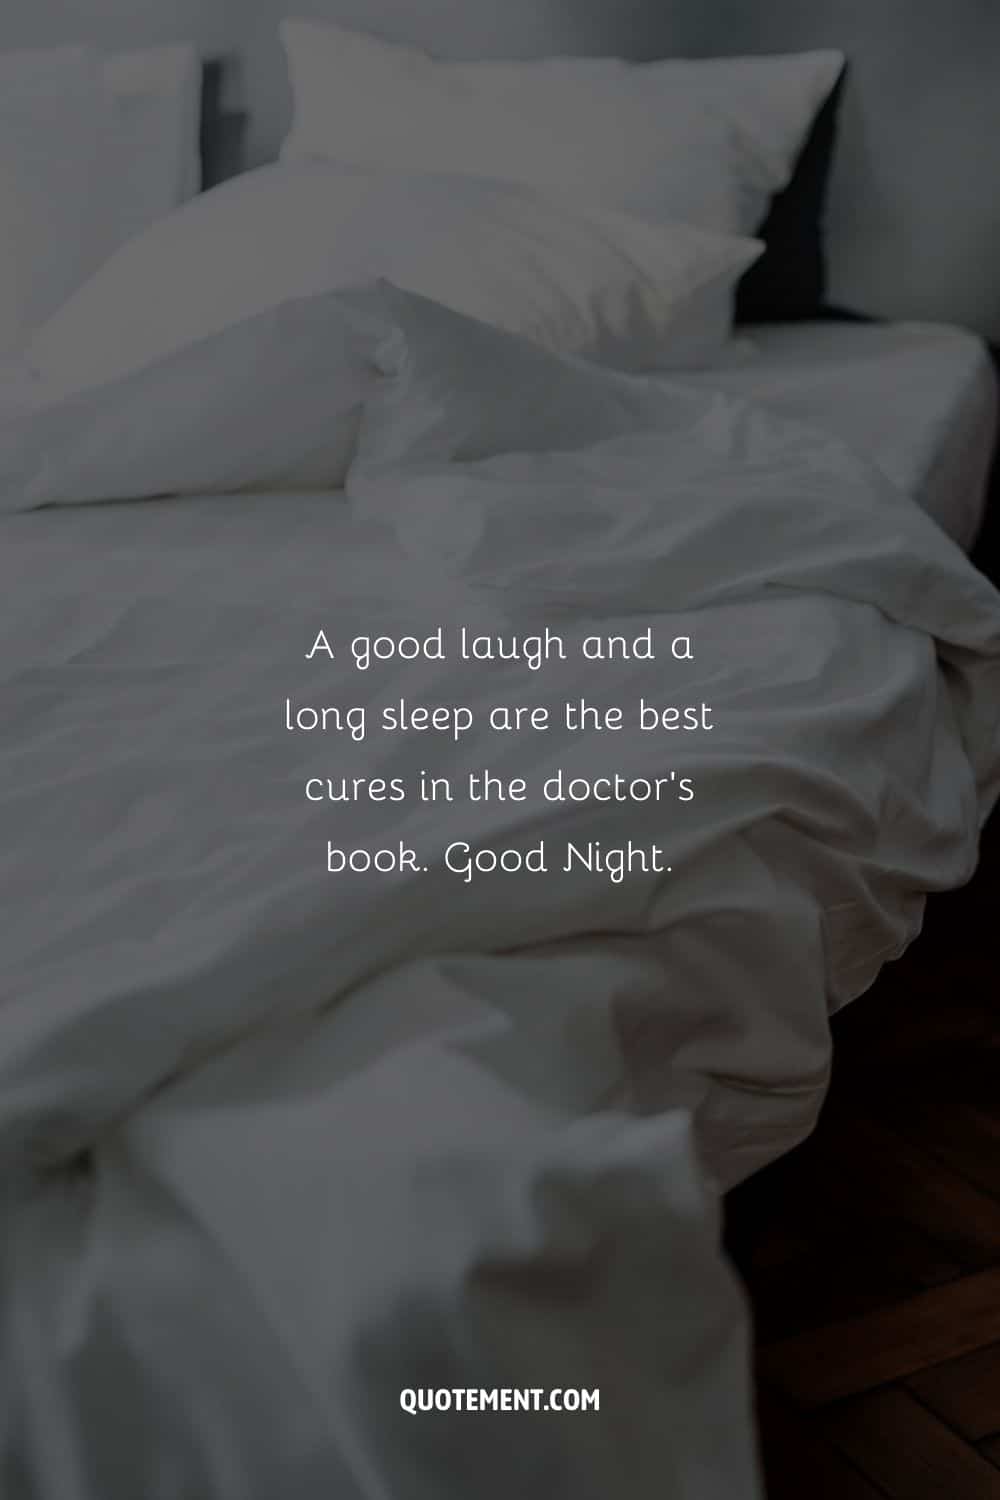 image of bed representing wise sleeping quote